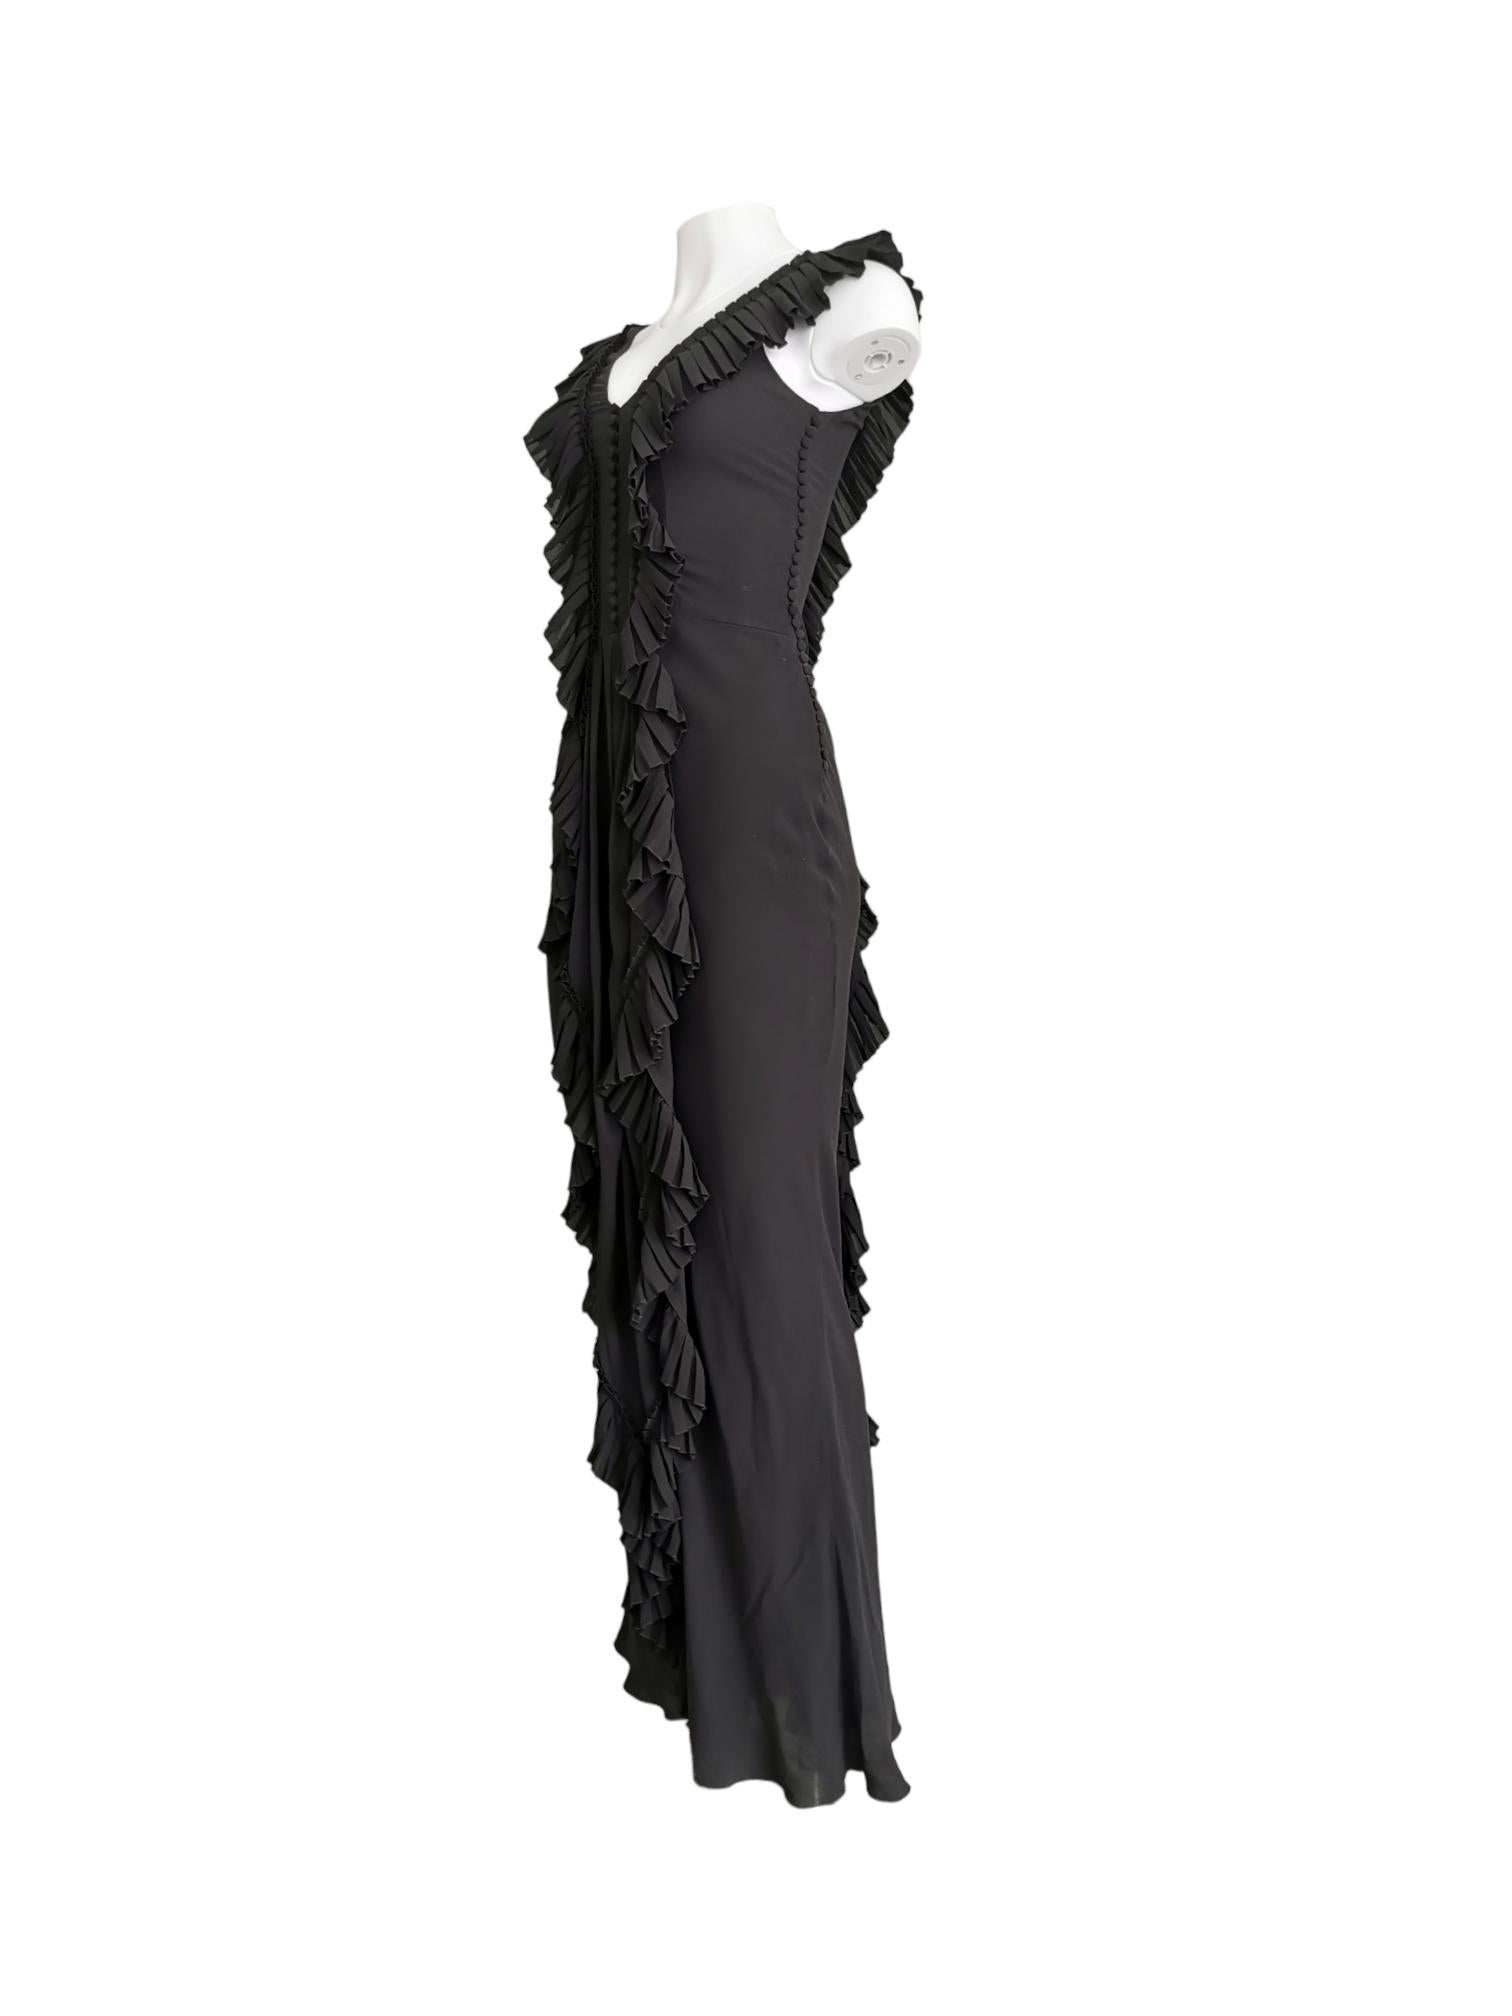 Beautiful silk black ruffle gown with button up detail on the left side and in the centre of the bust from the Galliano for Dior FW 2005 collection.

Size: UK 10

Material: Silk

Condition: Excellent

